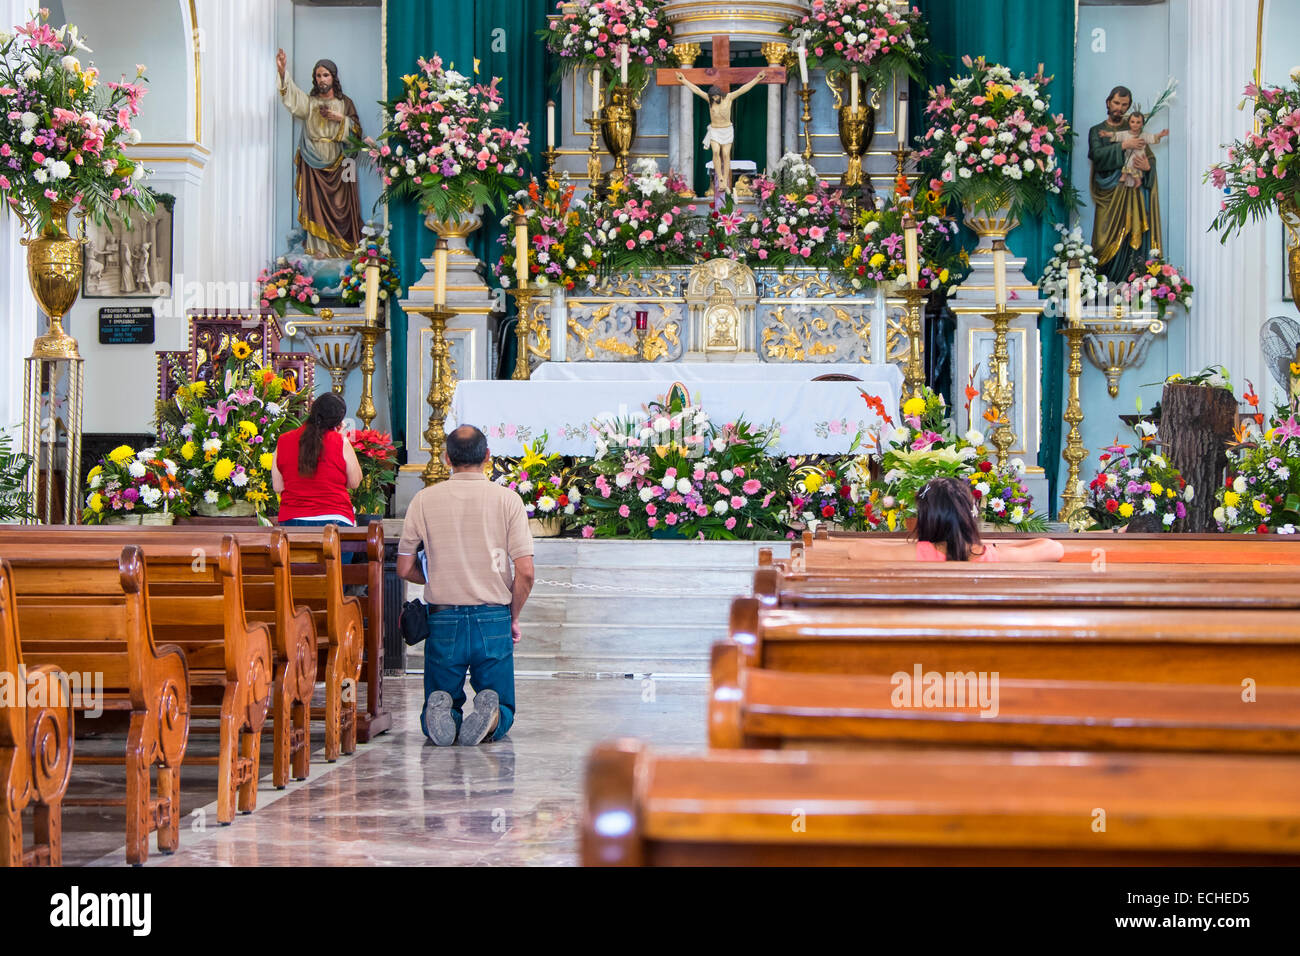 Mexican people praying in a church in Puerto Vallarta, Mexico. A man is approaching the altar and saying a prayer on his knees. Stock Photo